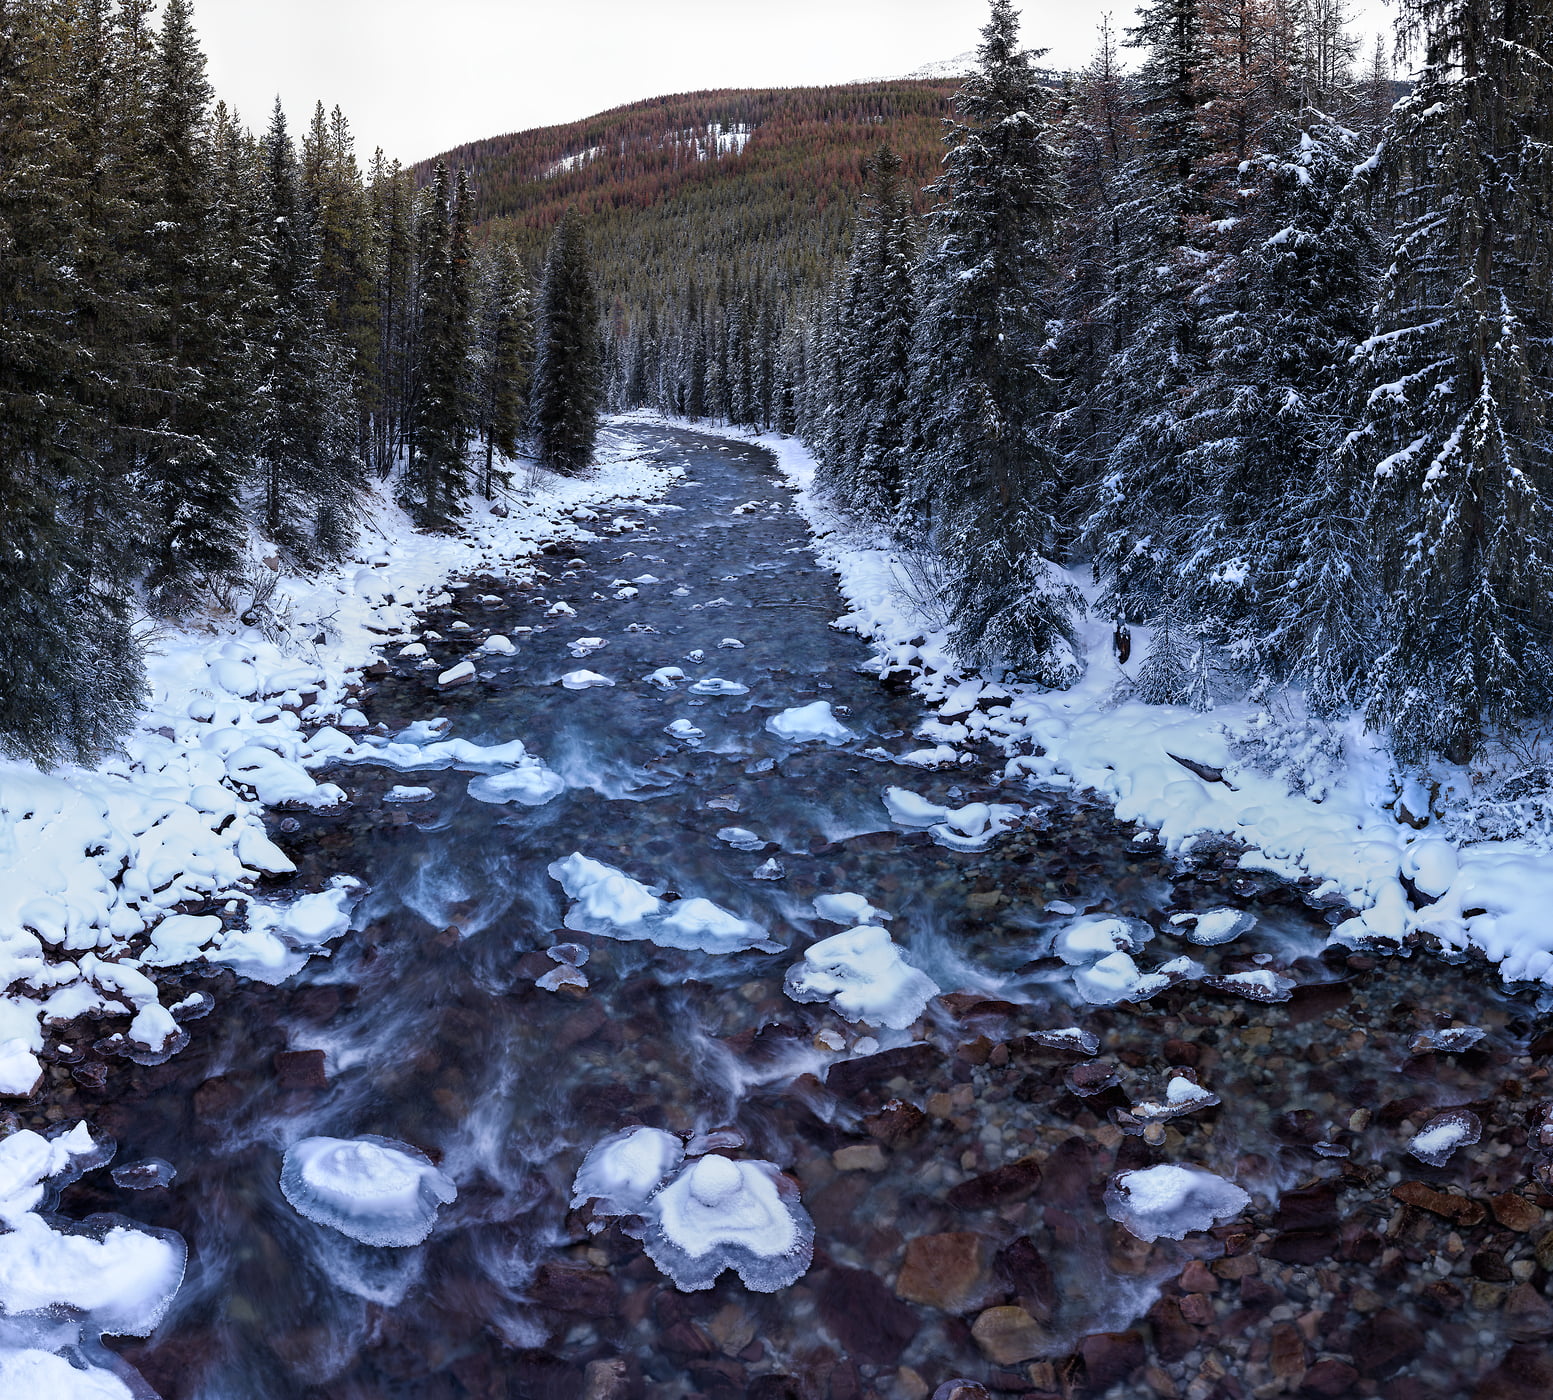 2,578 megapixels! A very high resolution, large-format VAST photo print of a river in winter with snow and evergreen trees; nature photograph created by Scott Dimond in Jasper National Park, Alberta, Canada.